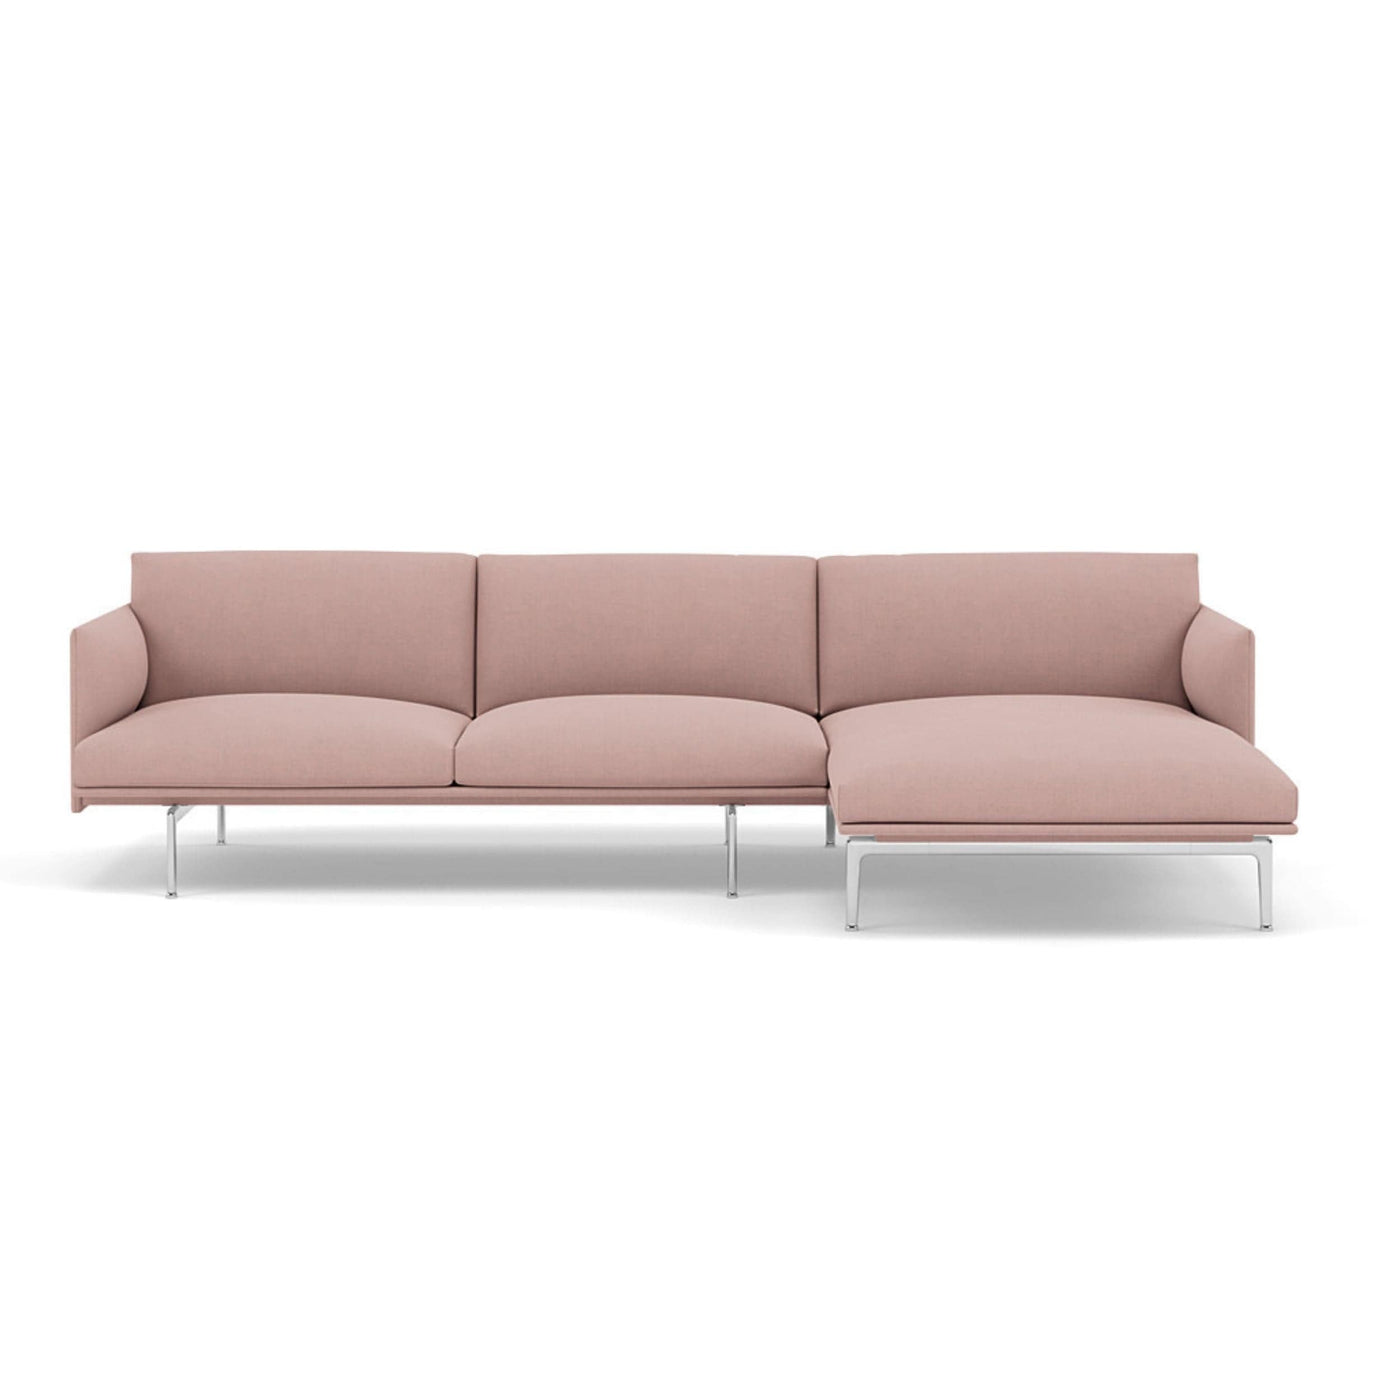 Muuto Outline Chaise Longue sofa in fiord 551. Made to order from someday designs. #colour_fiord-551